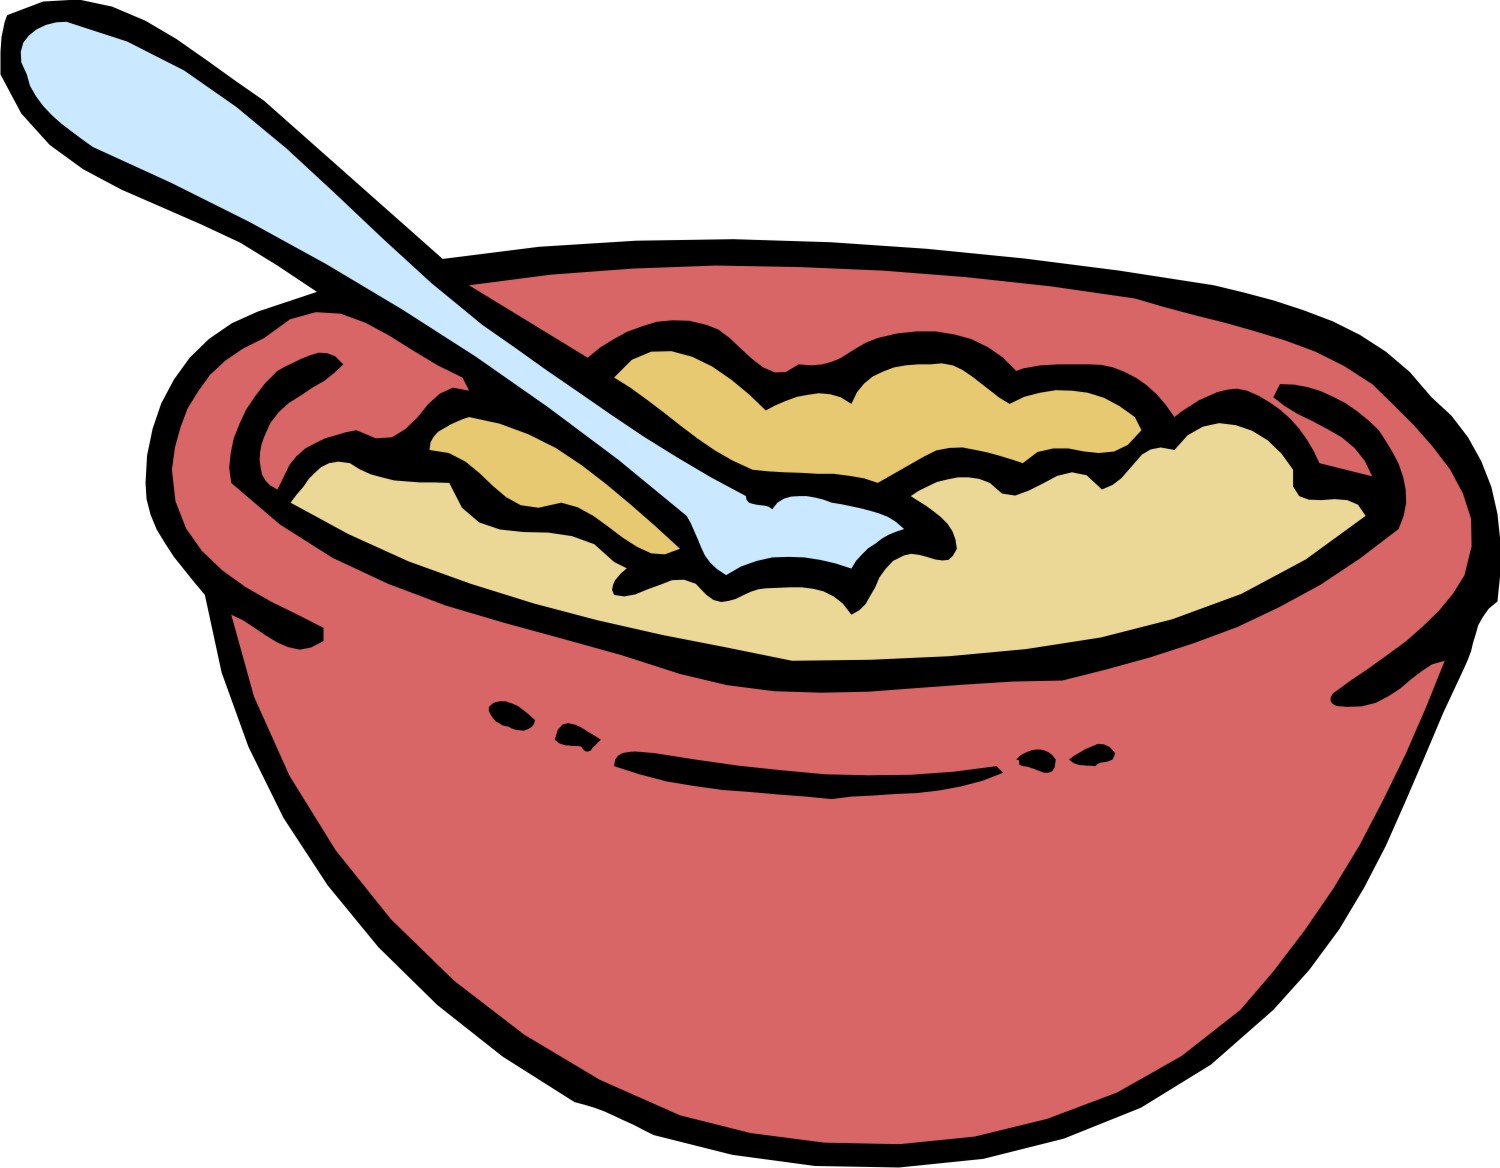 62 Images Of Bowl Of Cereal C - Bowl Of Cereal Clipart